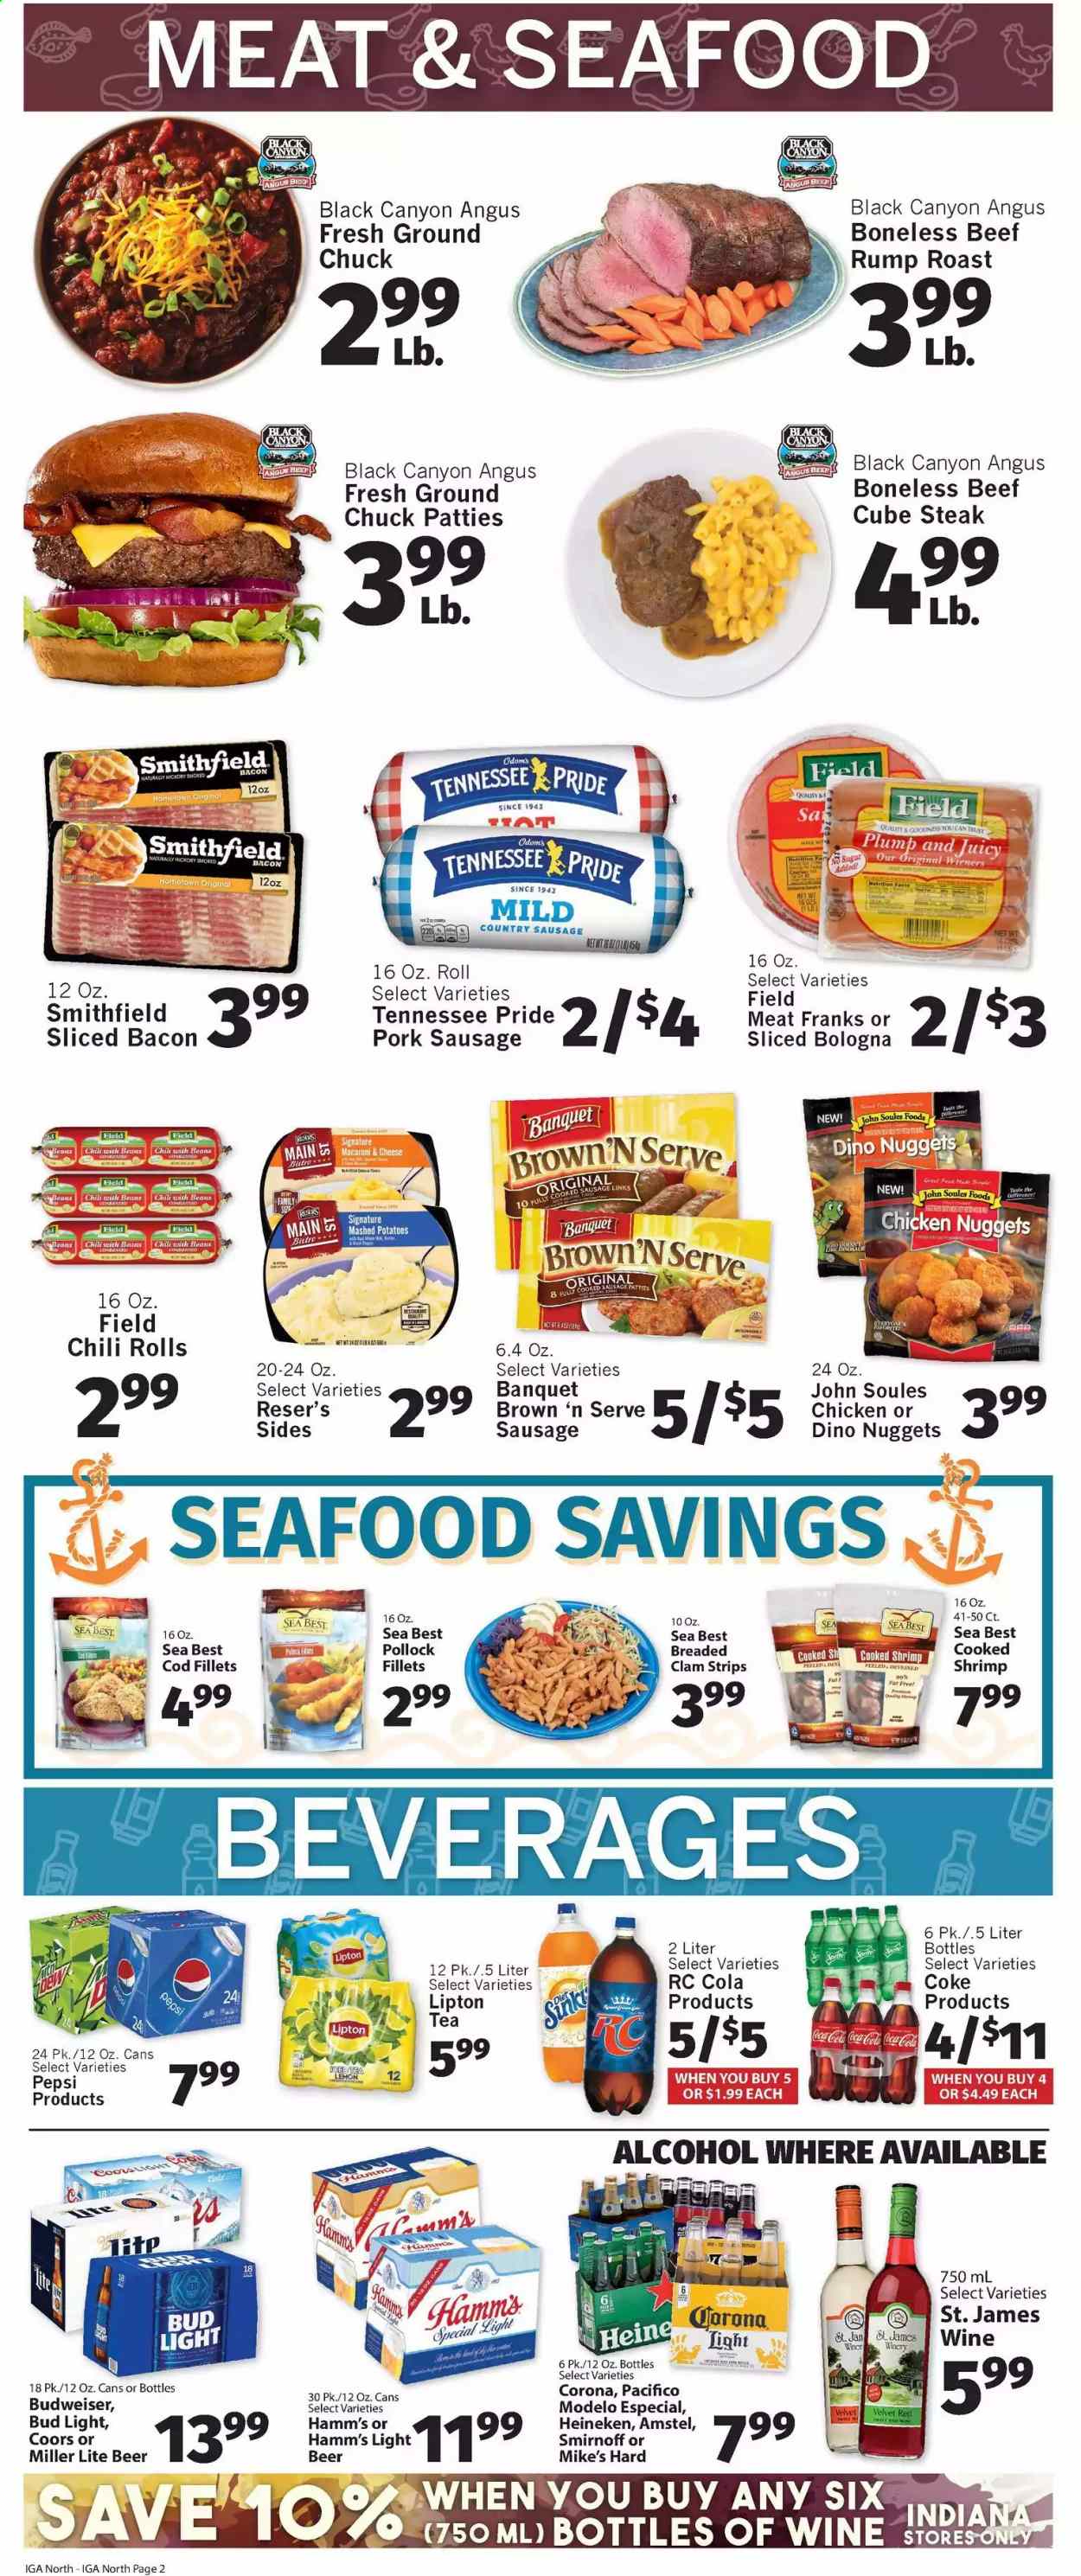 thumbnail - IGA Flyer - 01/20/2021 - 01/26/2021 - Sales products - Budweiser, Miller Lite, Coors, clams, cod, pollock, seafood, shrimps, macaroni & cheese, mashed potatoes, nuggets, chicken nuggets, bacon, bologna sausage, sausage, Brown 'N Serve, beans, strips, pork sausage, Coca-Cola, Pepsi, Lipton, tea, wine, alcohol, Smirnoff, beer, Bud Light, Corona Extra, Heineken, Modelo, beef meat, ground chuck, steak, Trust. Page 2.